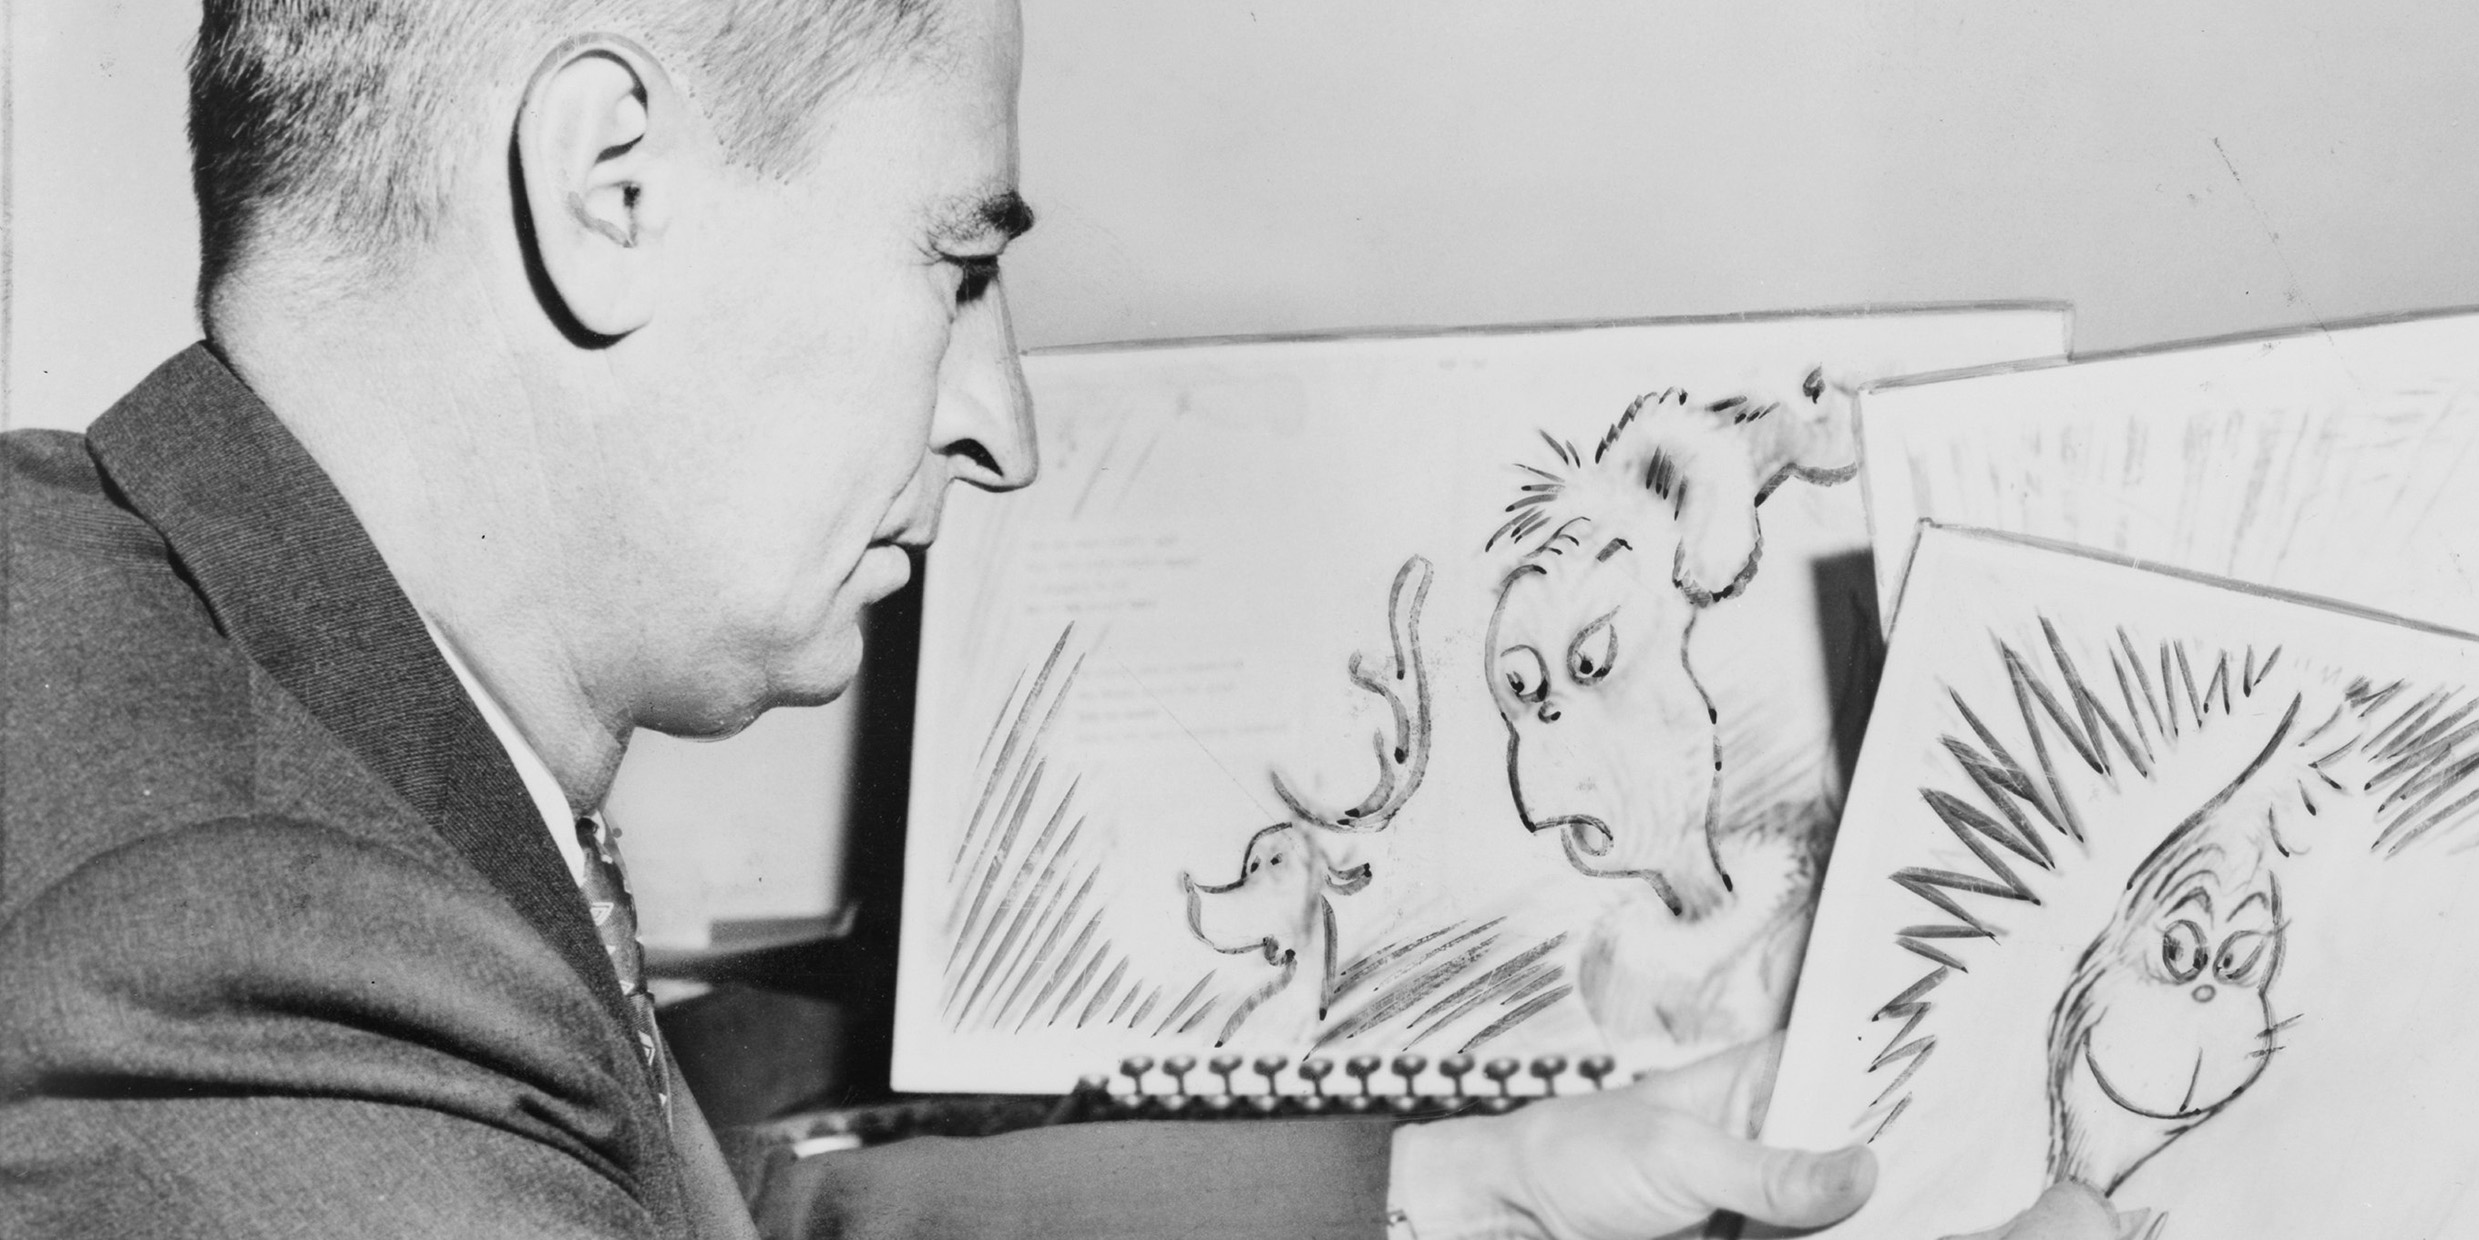 Image of Dr Seuss with some of his creations